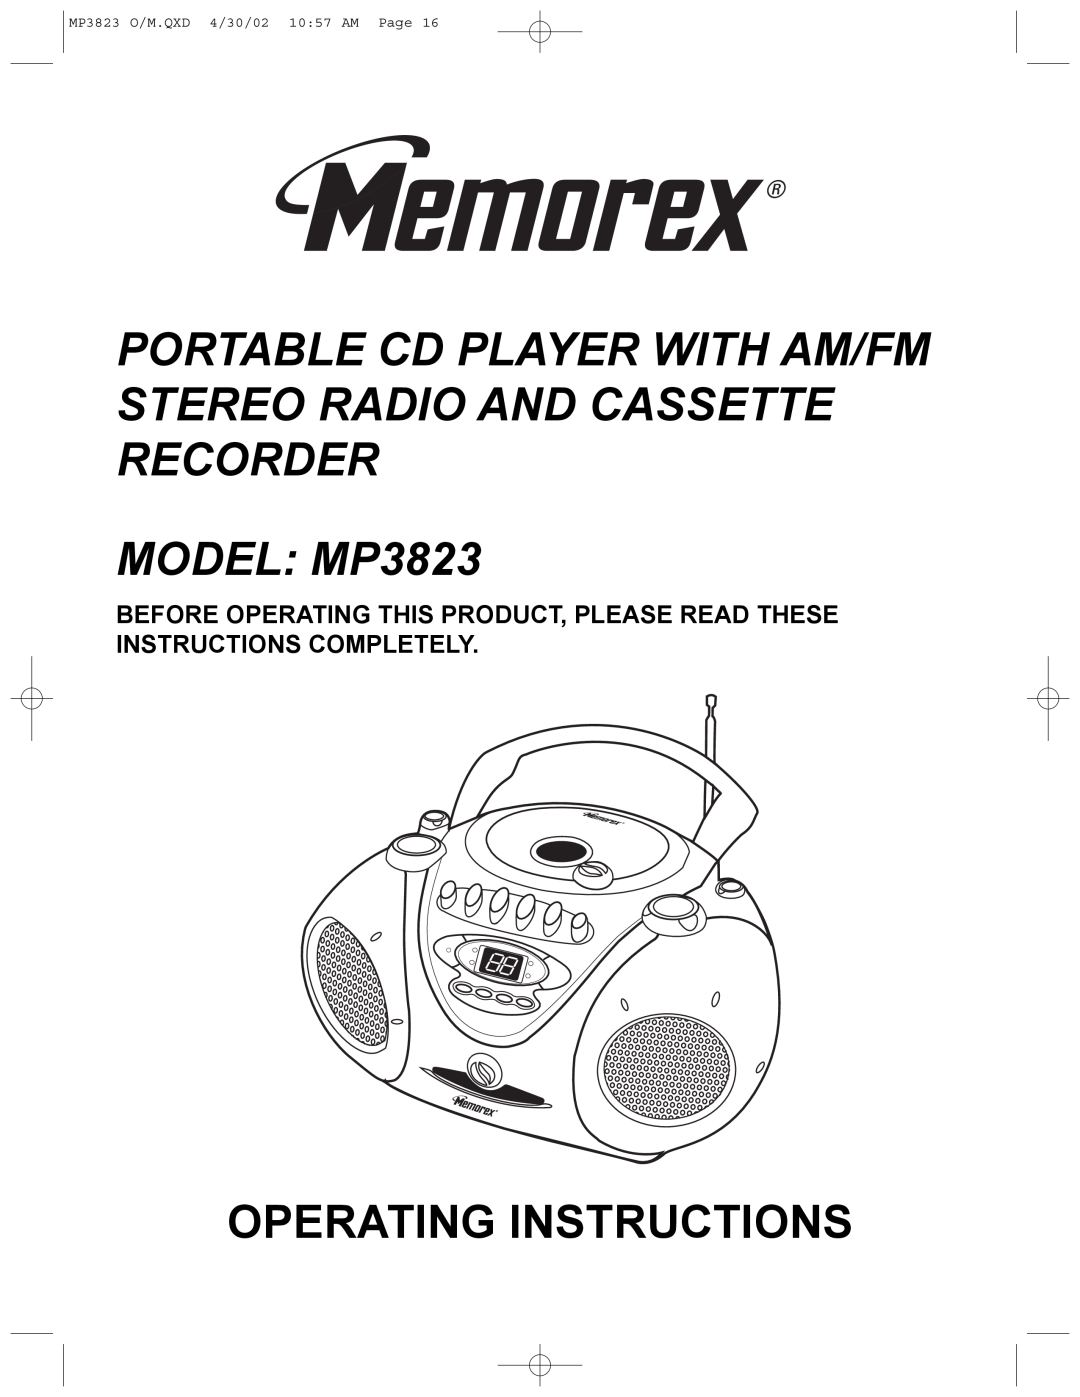 Memorex manual MODEL MP3823, Operating Instructions, MP3823 O/M.QXD 4/30/02 10 57 AM Page 